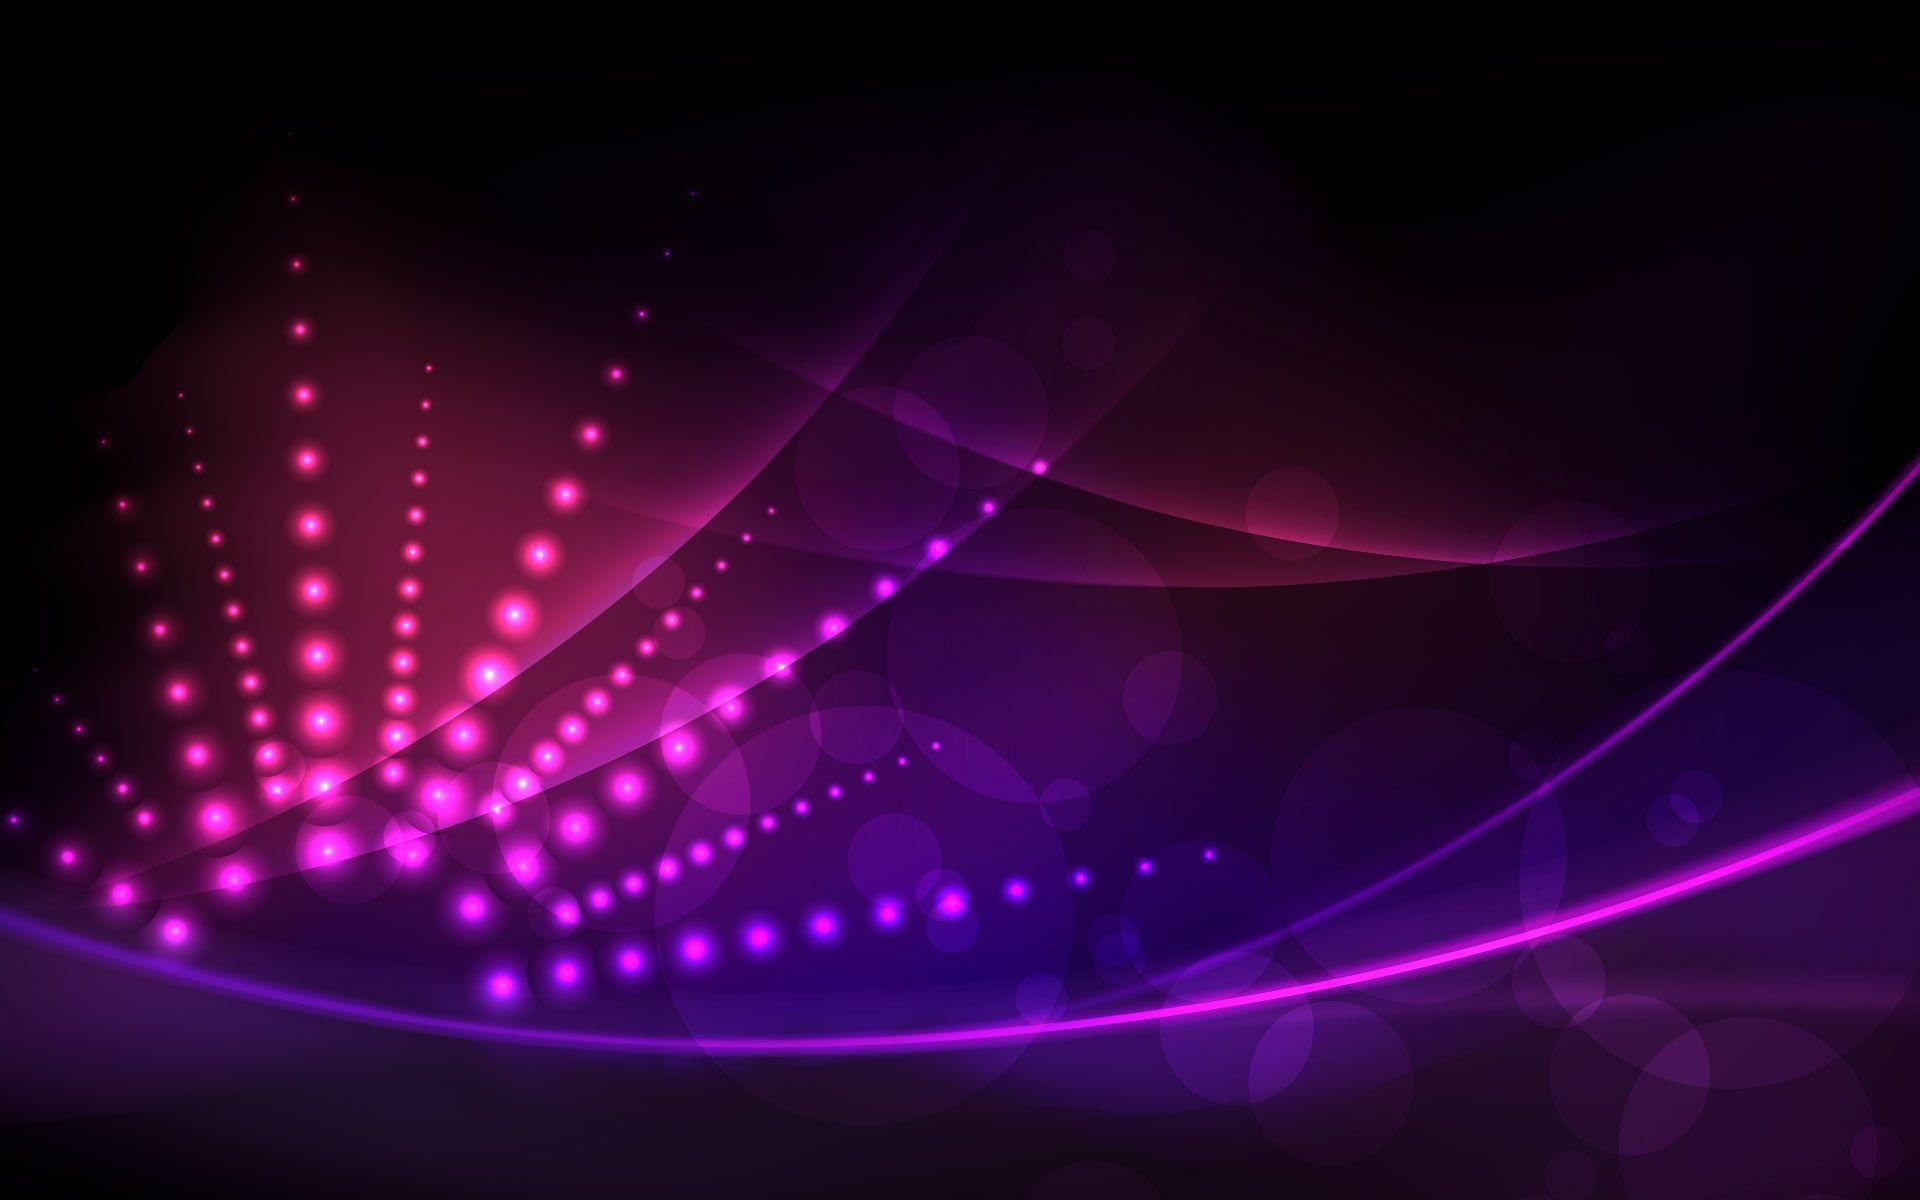 HD Purple Wallpaper Background Image To Download For Free